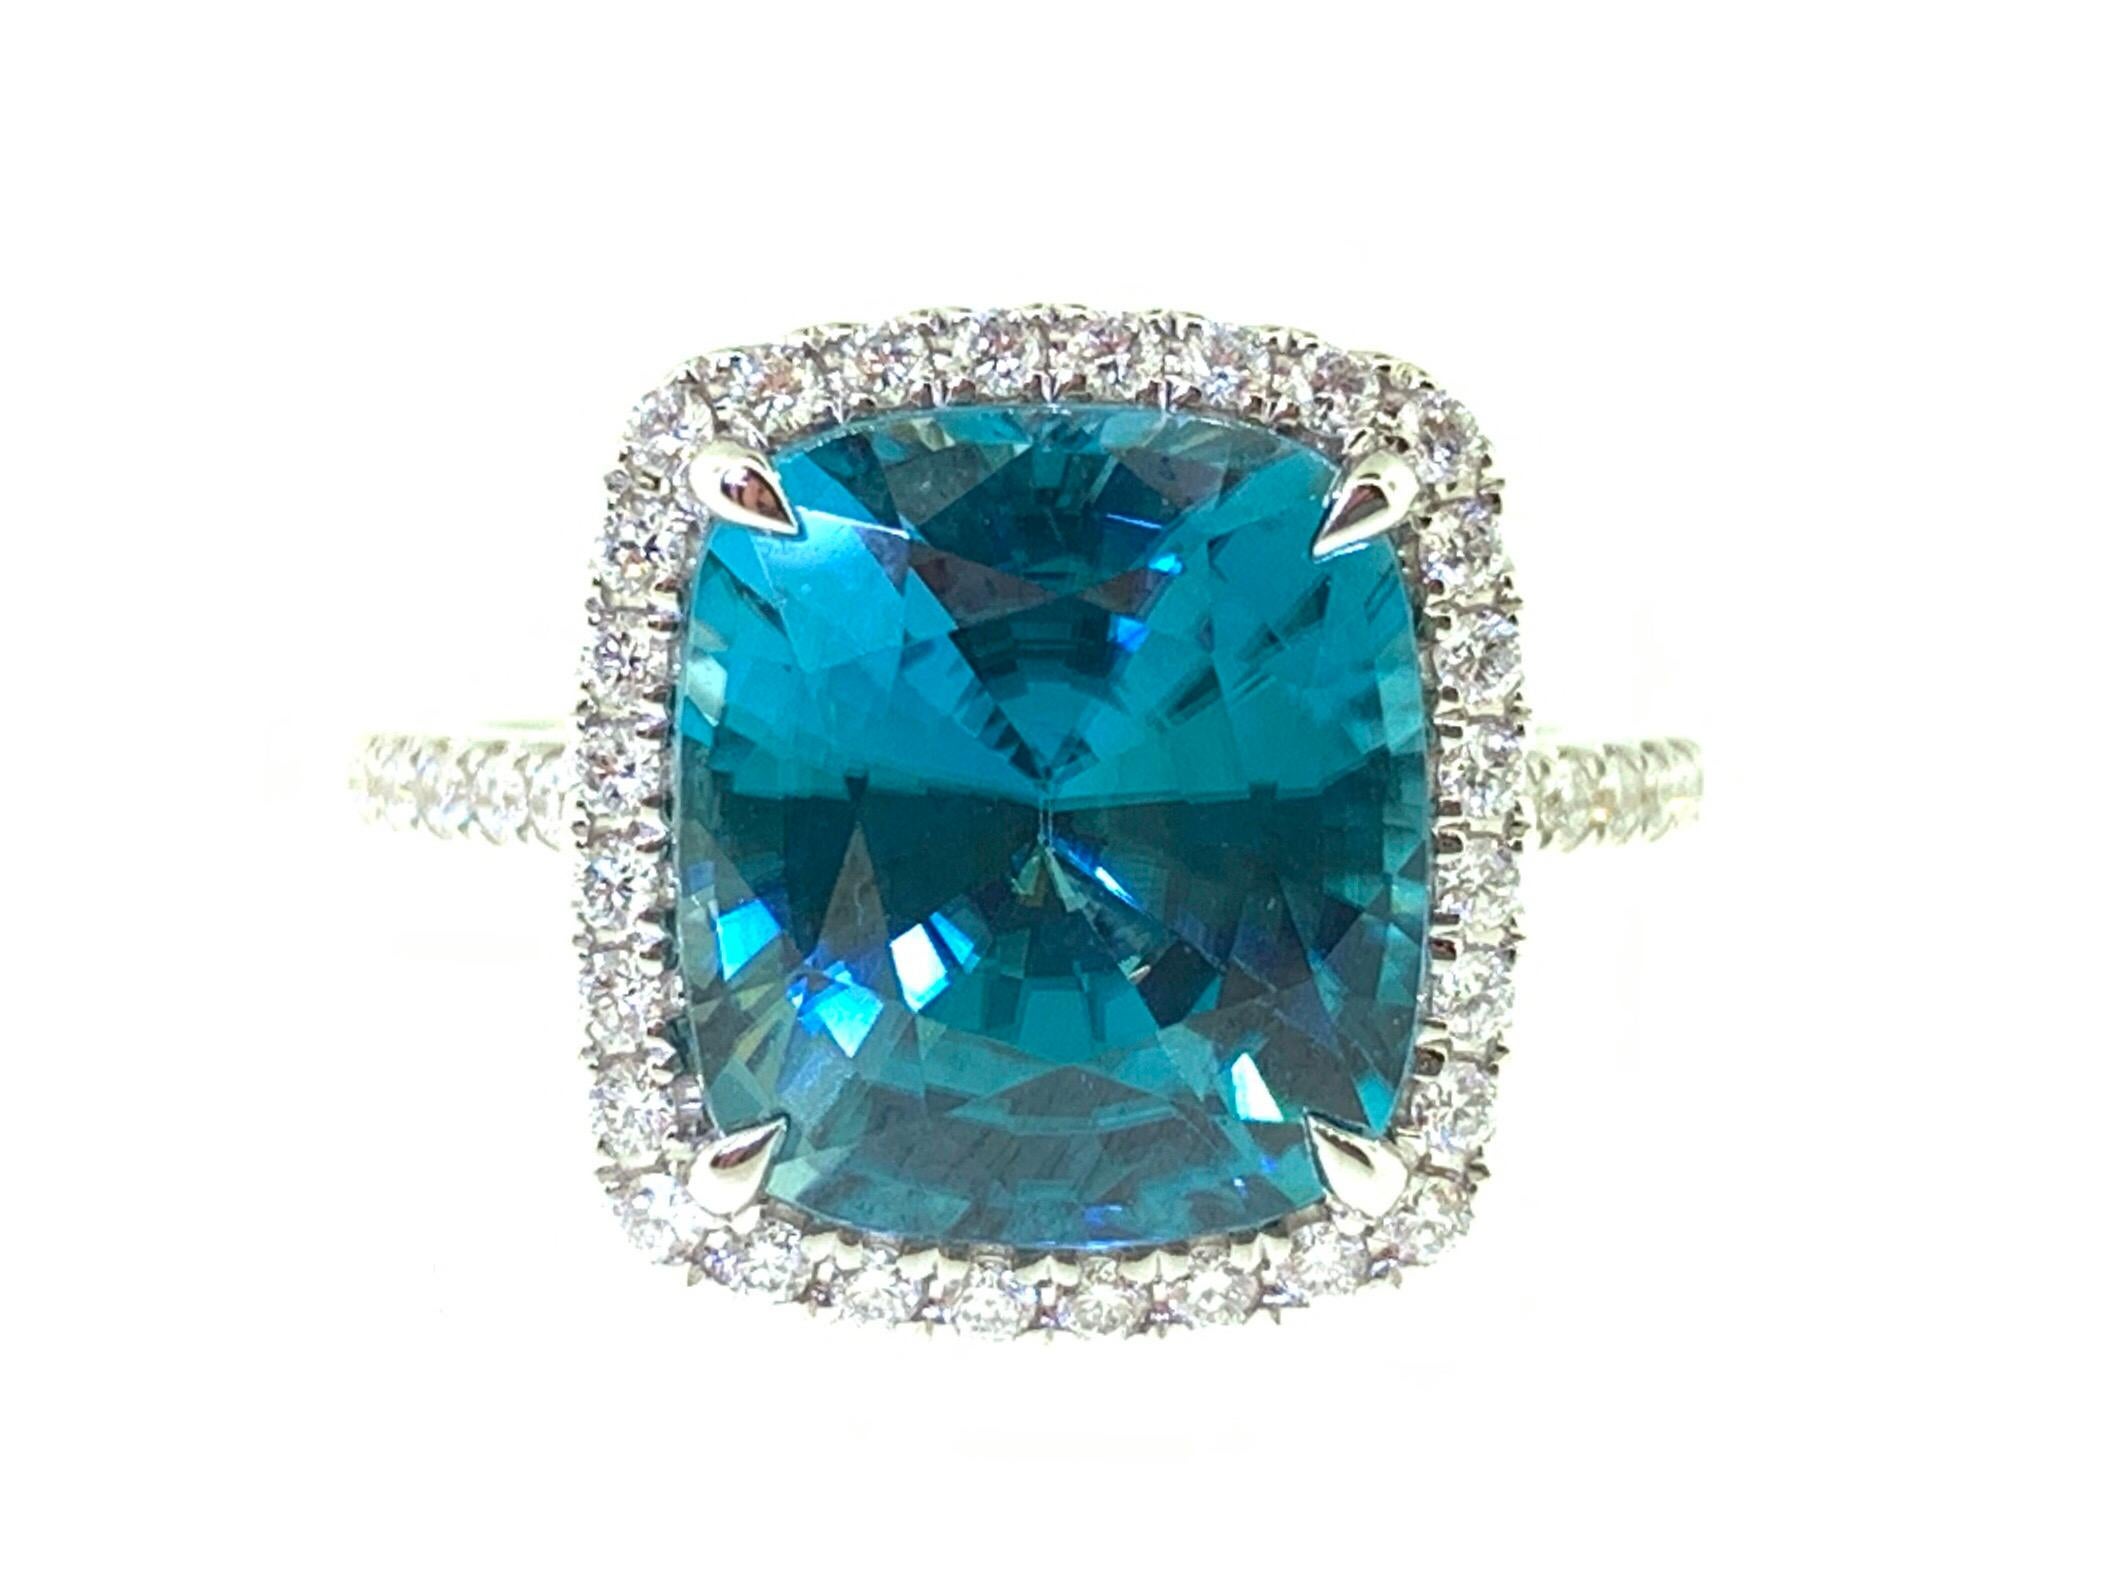 This stunning cocktail ring features a beautiful 7.76 Carat Cushion Blue Zircon with a Diamond Halo, on a Diamond Shank. This ring is set in 18k white gold, Ring Size is 6 1/2. Total Diamond Weight = 0.37 carats.